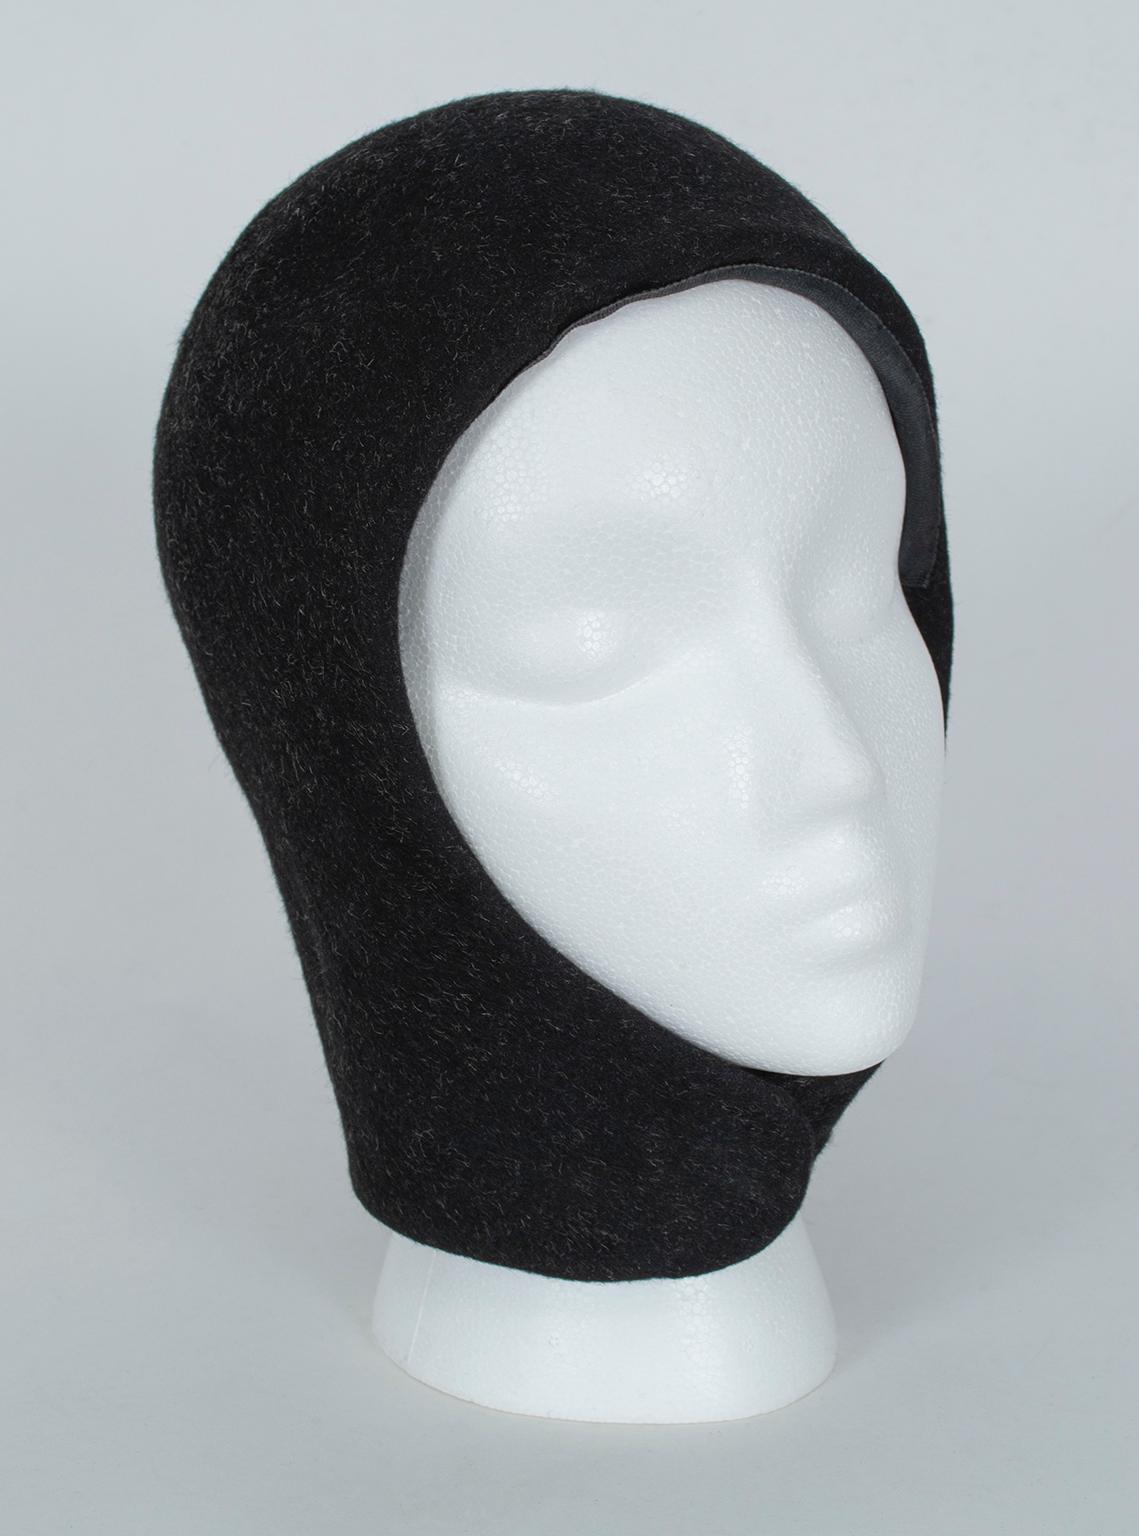 As chic and cool as it gets, this futuristic-looking balaclava is as fashionable now as the day it was made--possibly more so. Your solution for bad hair days, cold weather, or just shunning the world (worn with extra large sunglasses, of course)